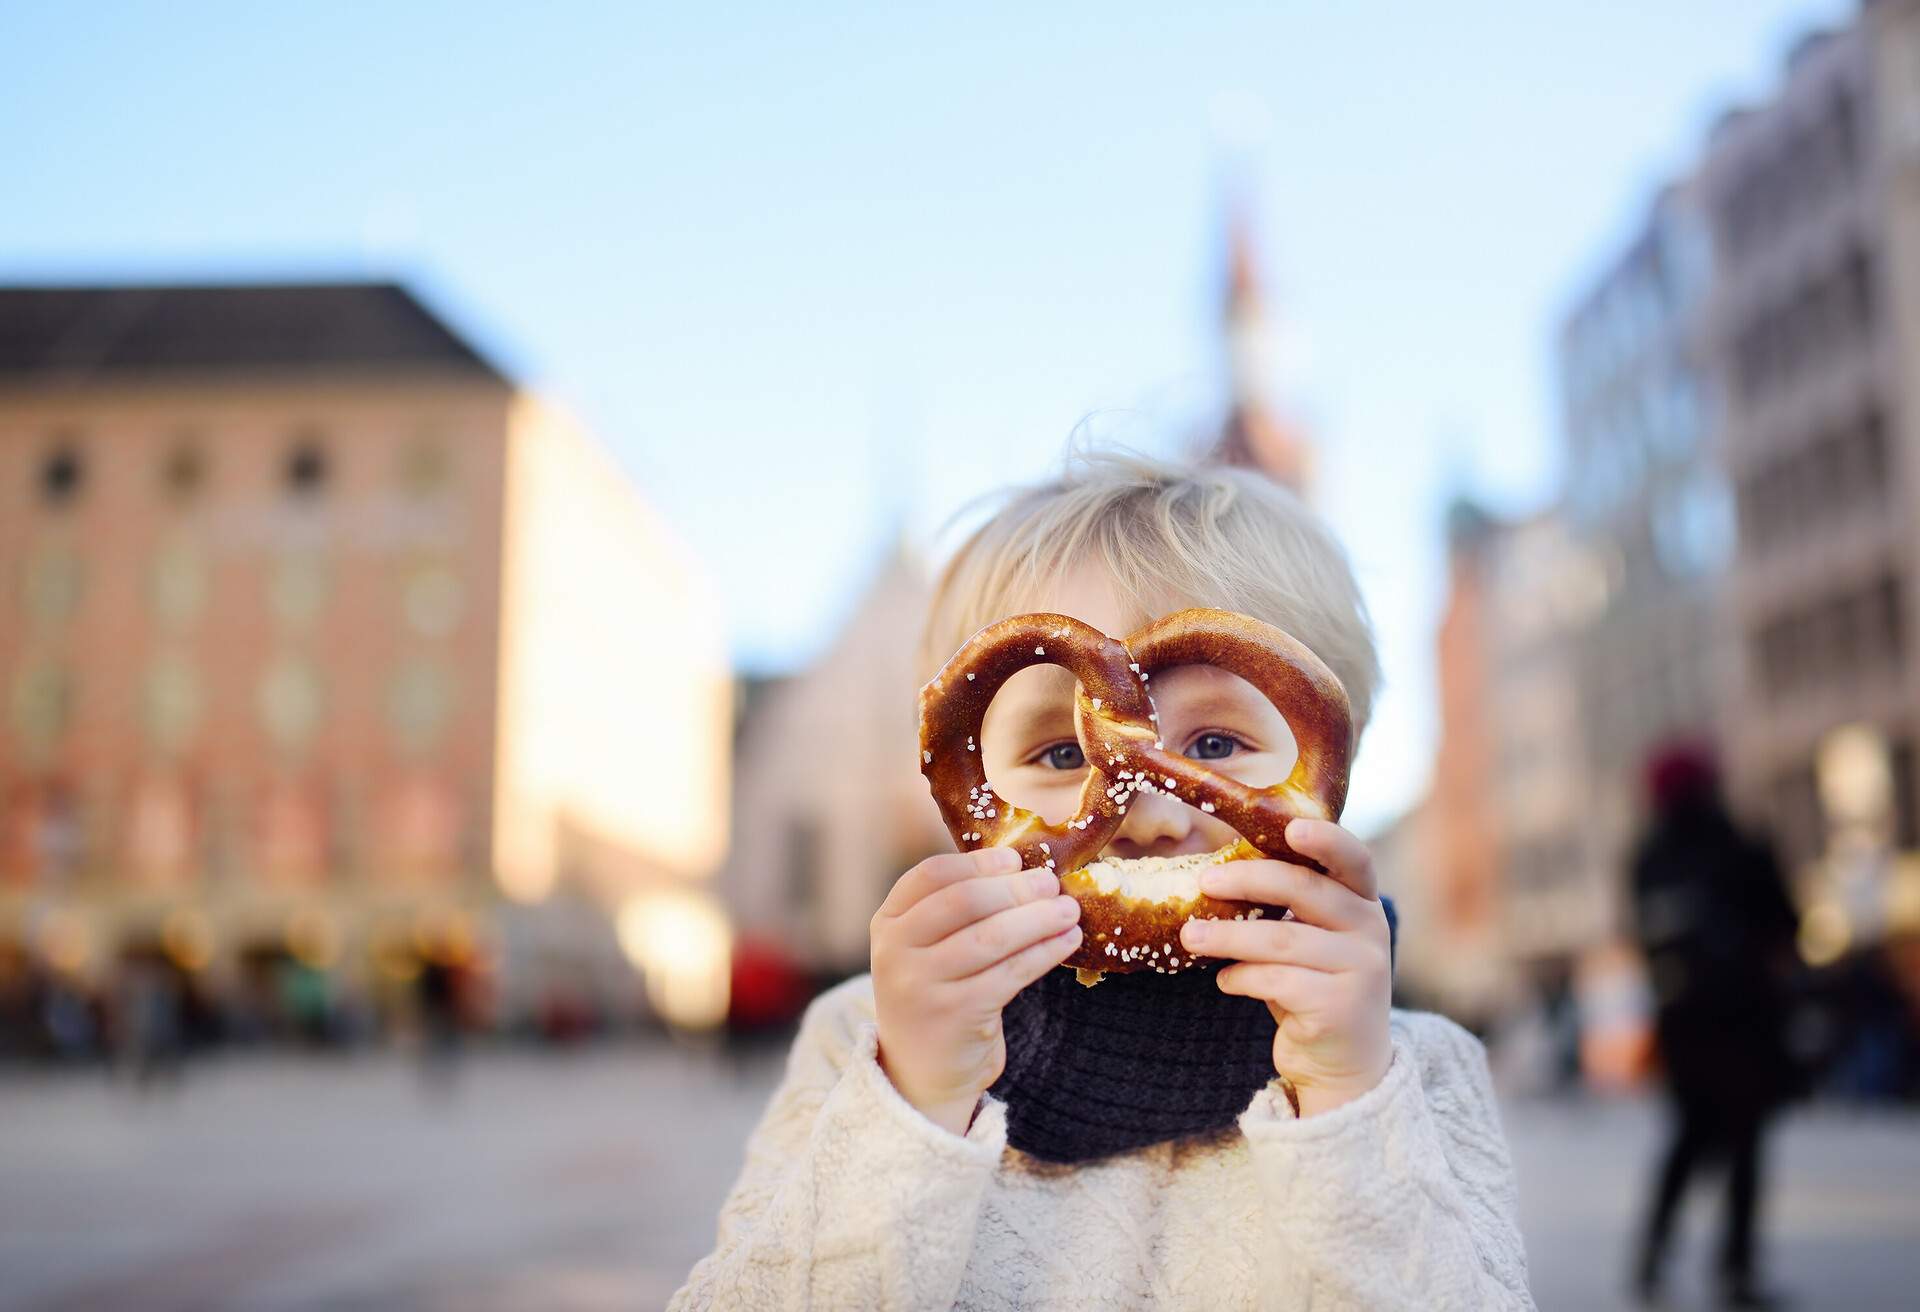 Little tourist holding traditional bavarian bread called pretzel on the town hall building background in Munich, Germany. Preschooler boy enjoy travel with his parents